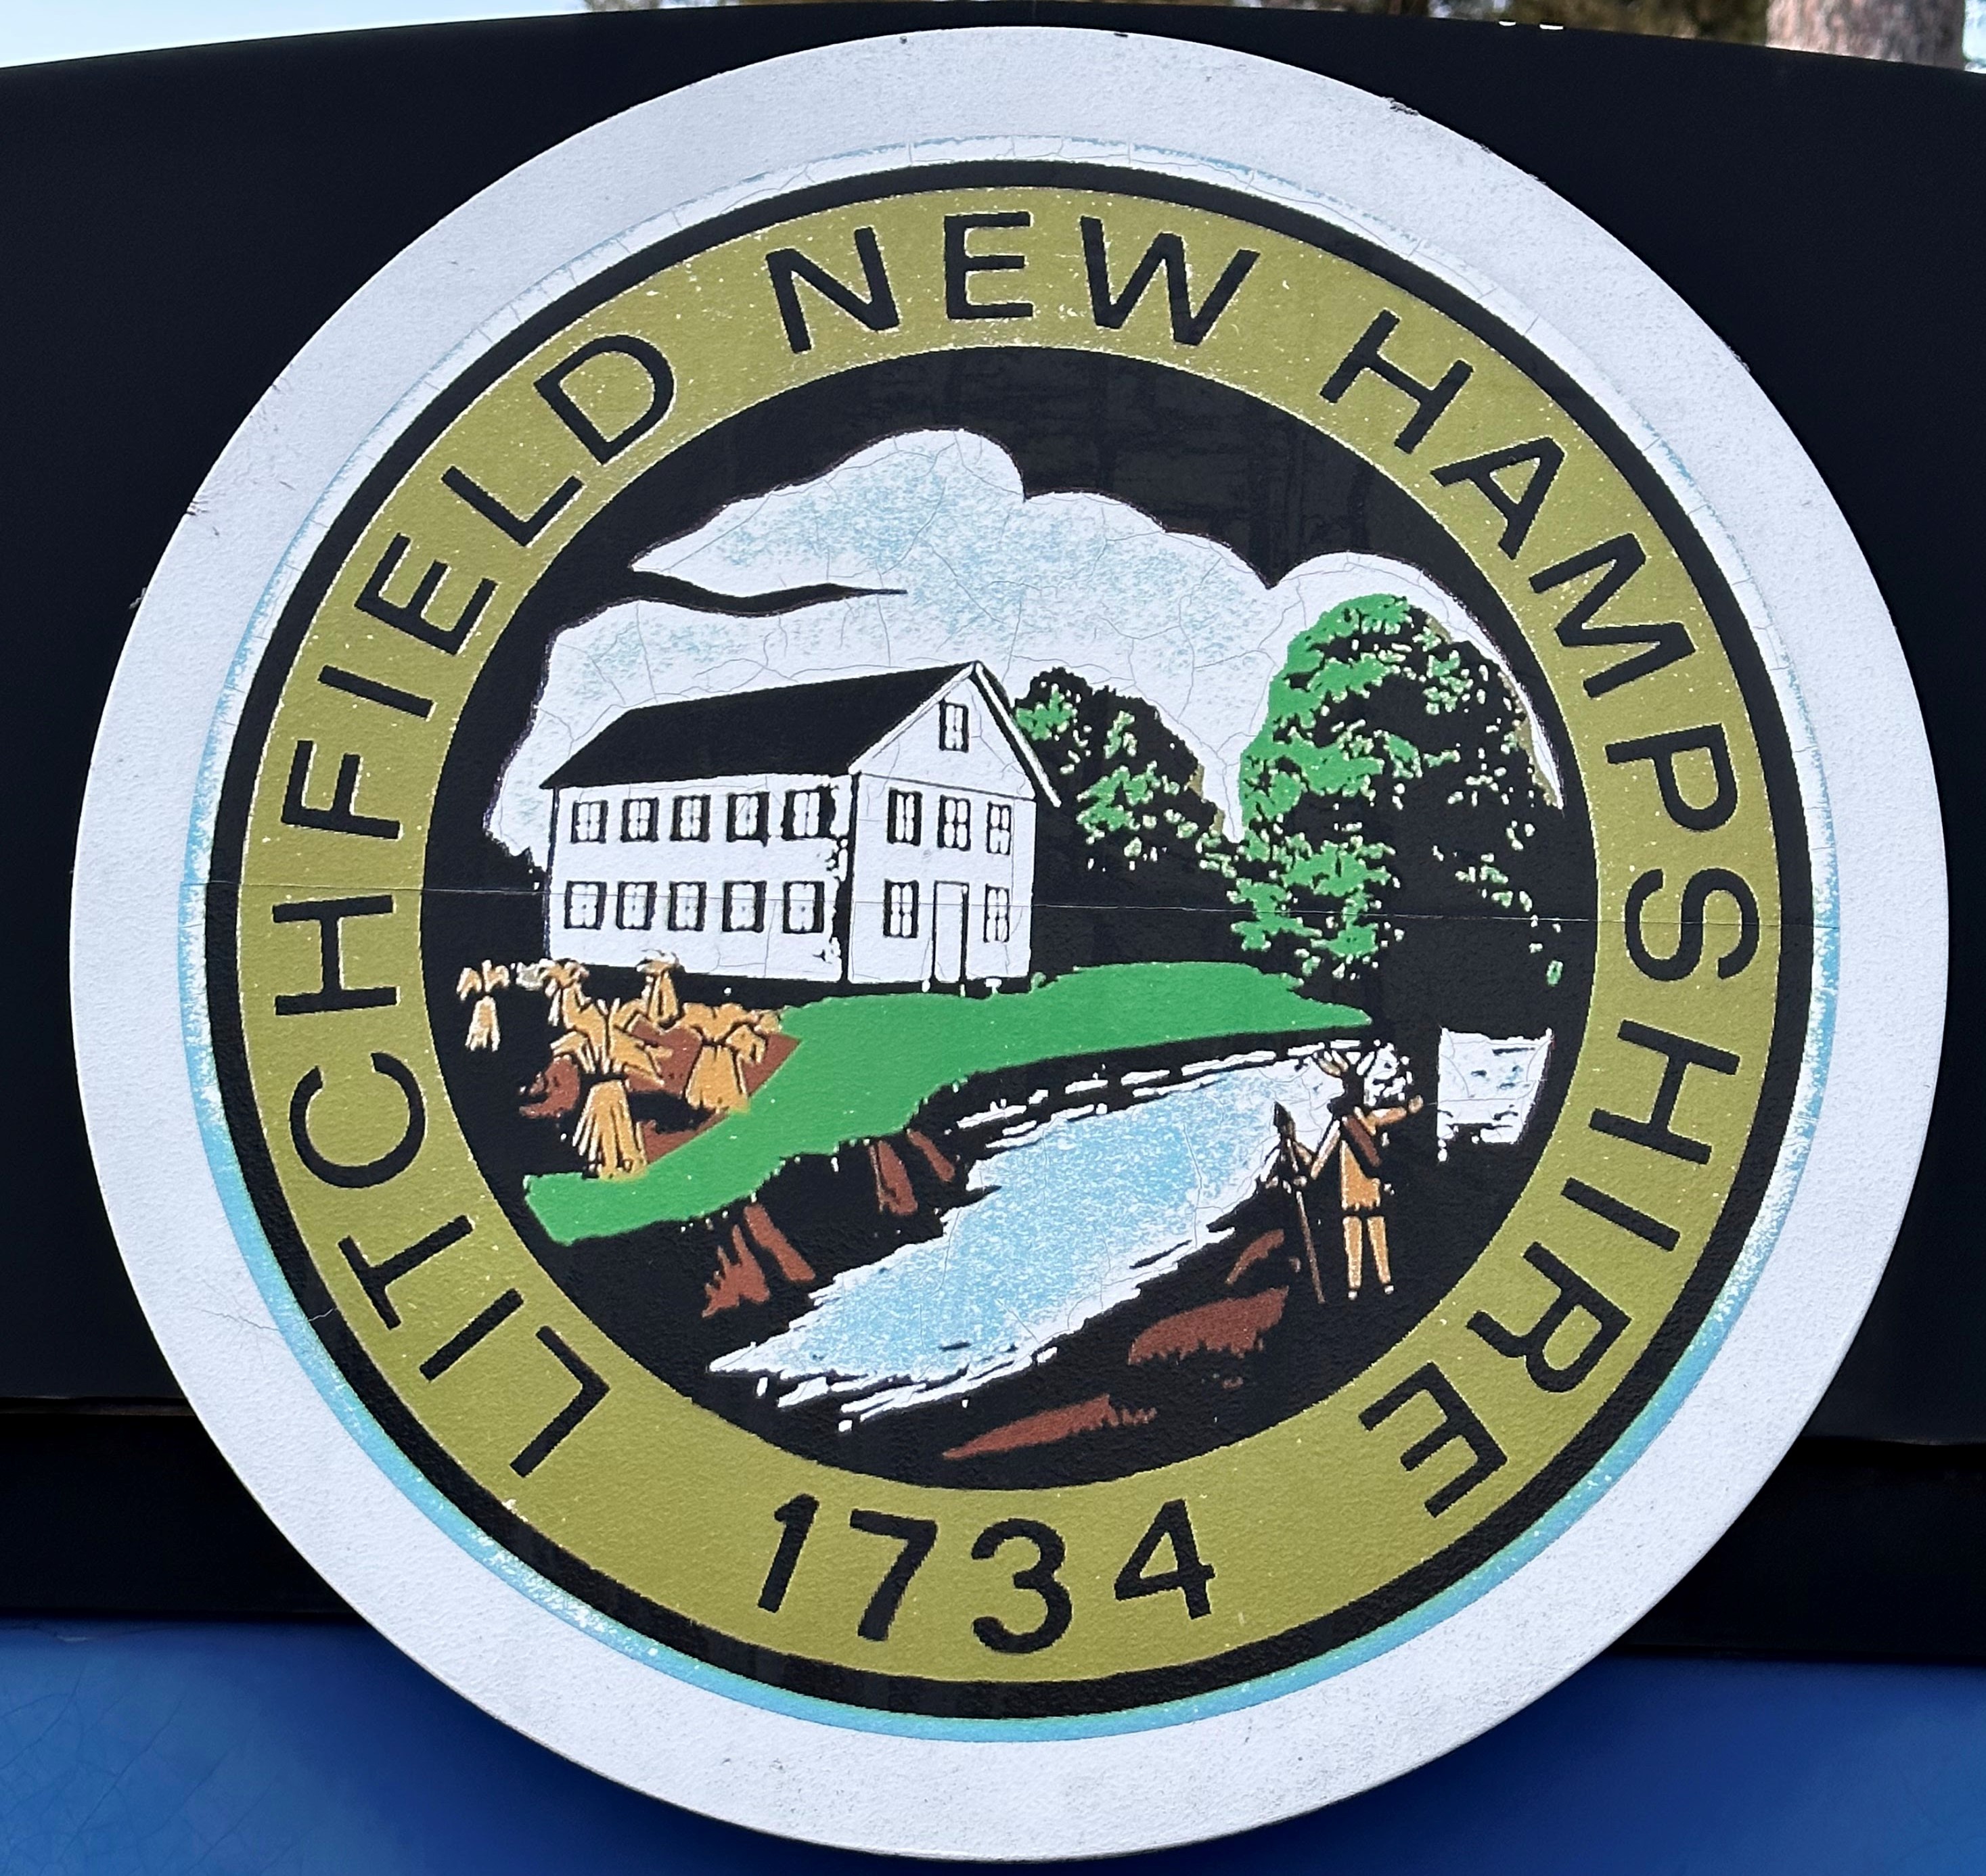 Litchfield town crest is a gold circle containing the words Litchfield New Hampshire 1734 , and inside the circle is an illustrated picture of a farm with a river and a man with a spear next to a tree, presented by New Hampshire personal injury law firm Buckley Law Offices.